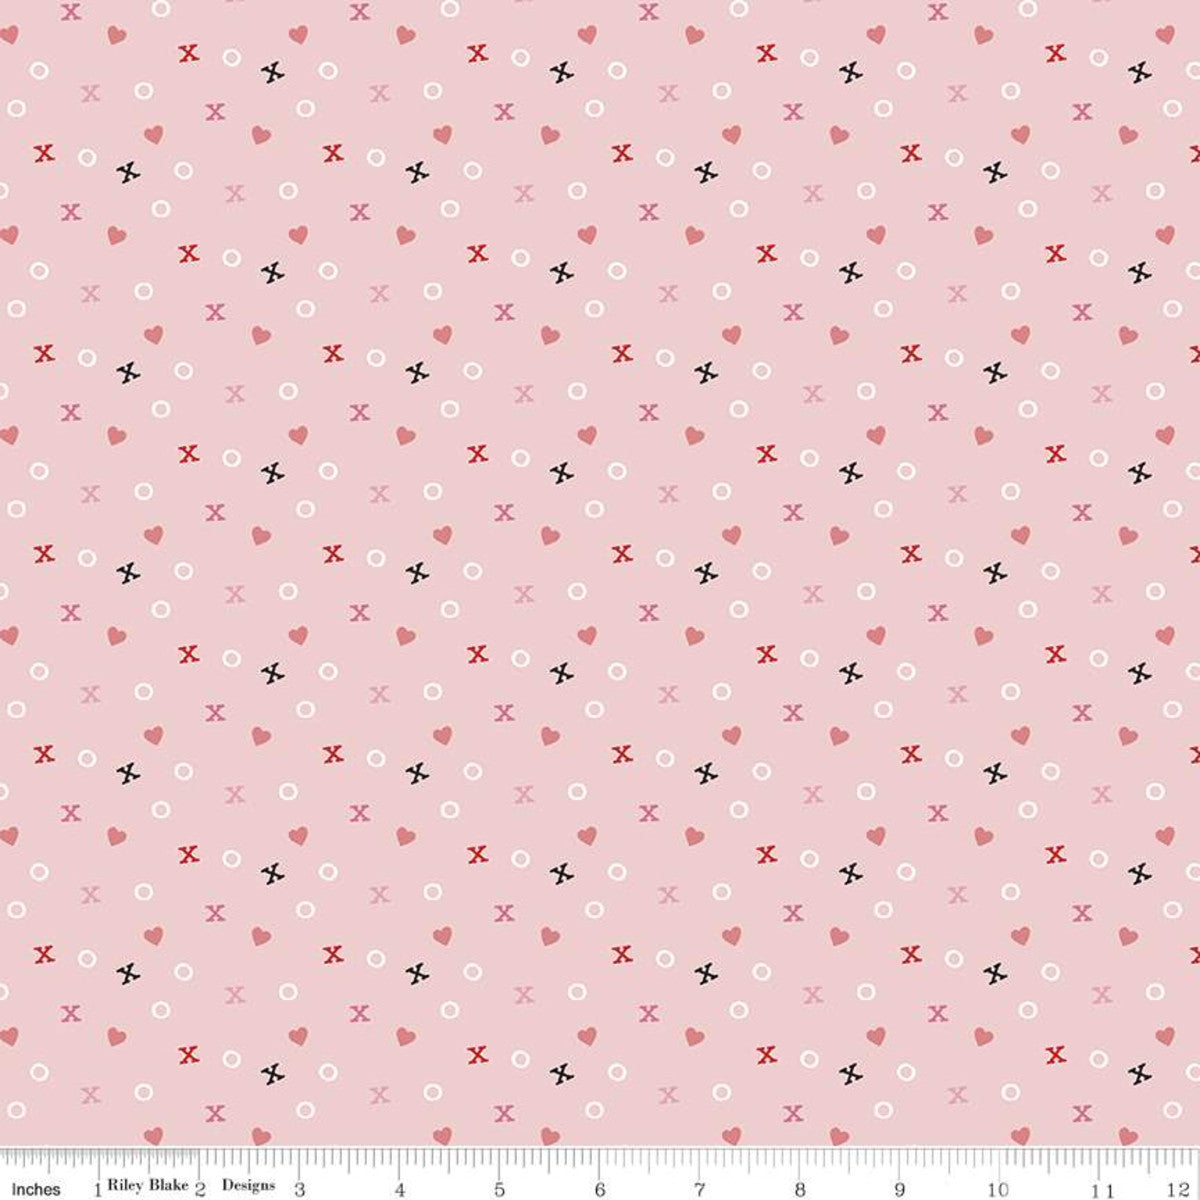 Falling in Love by Dani Mogstad Xs and Os Blush     C11283-BLUSH Cotton Woven Fabric